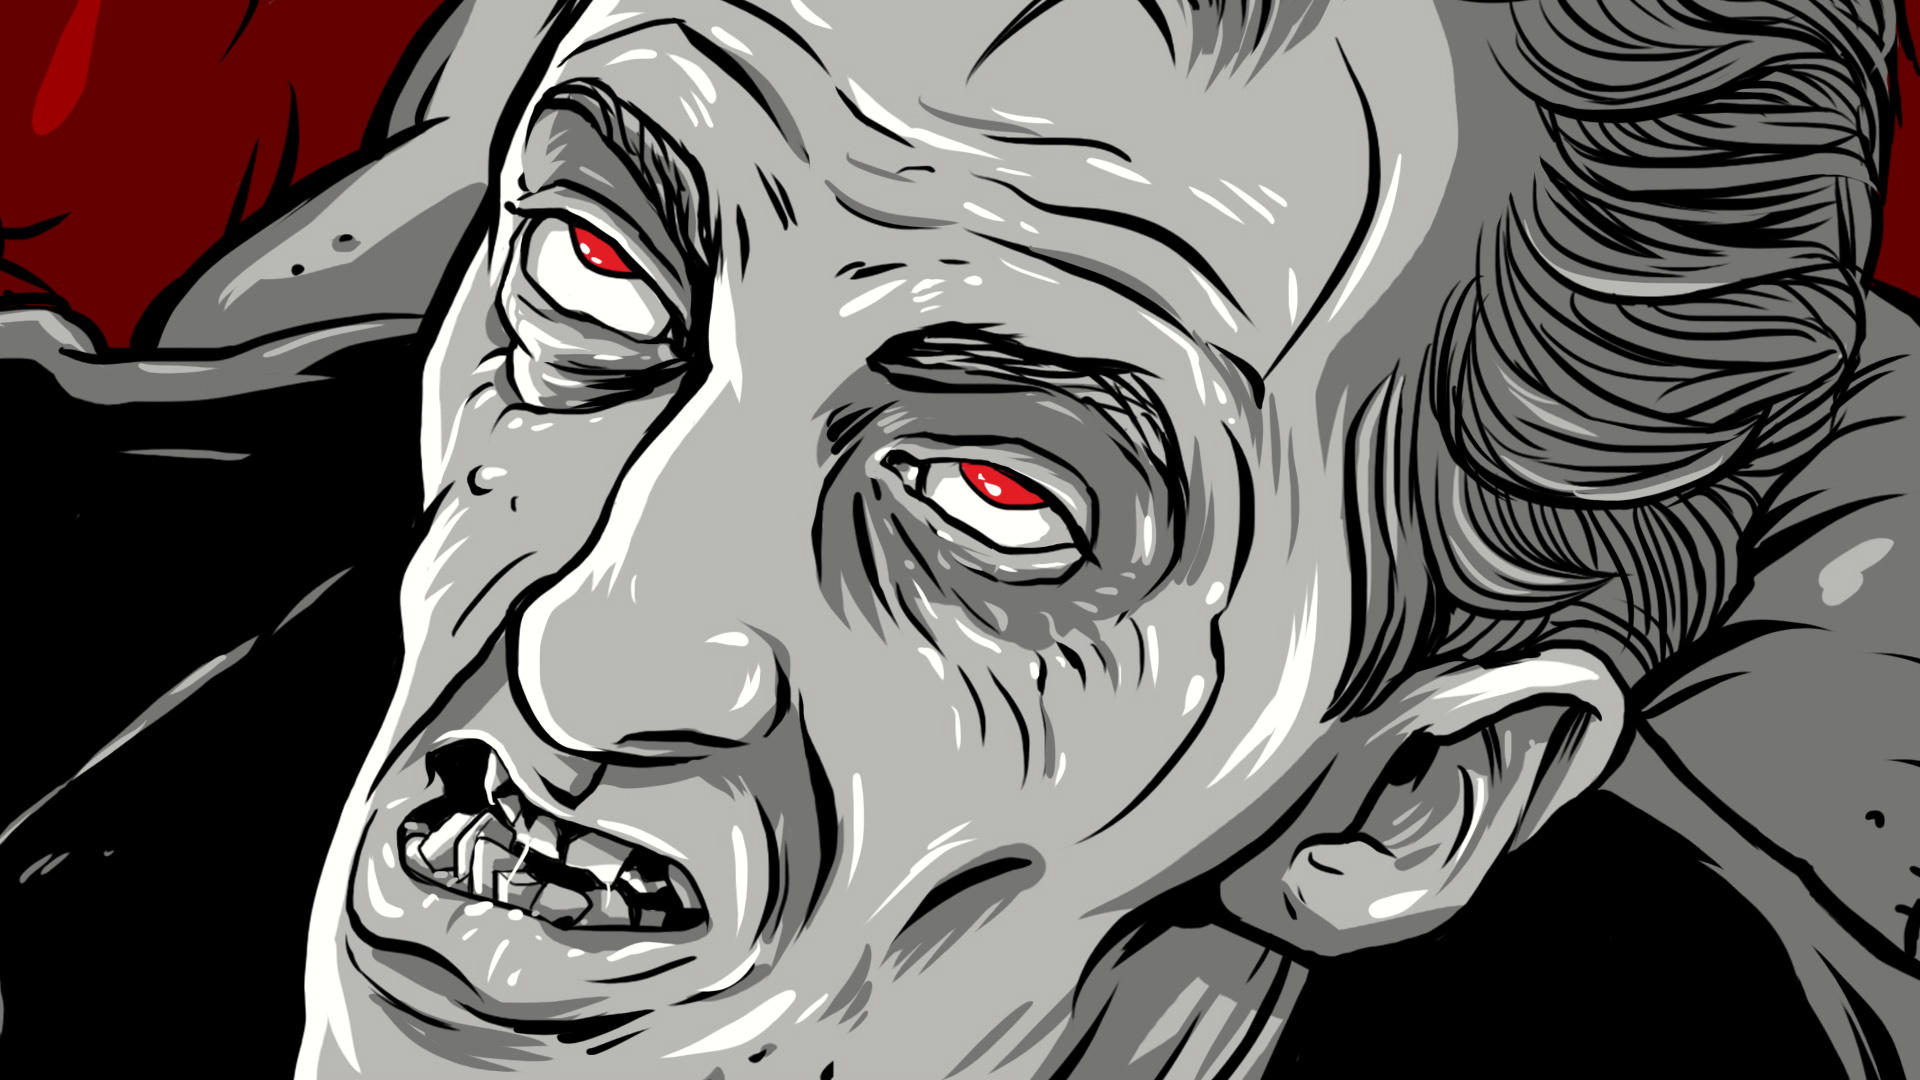 An illustration of actor Bill Hinzman in the 1968 film Night of the Living Dead, as seen in Birth of the Living Dead. Photo: Predestinate Productions